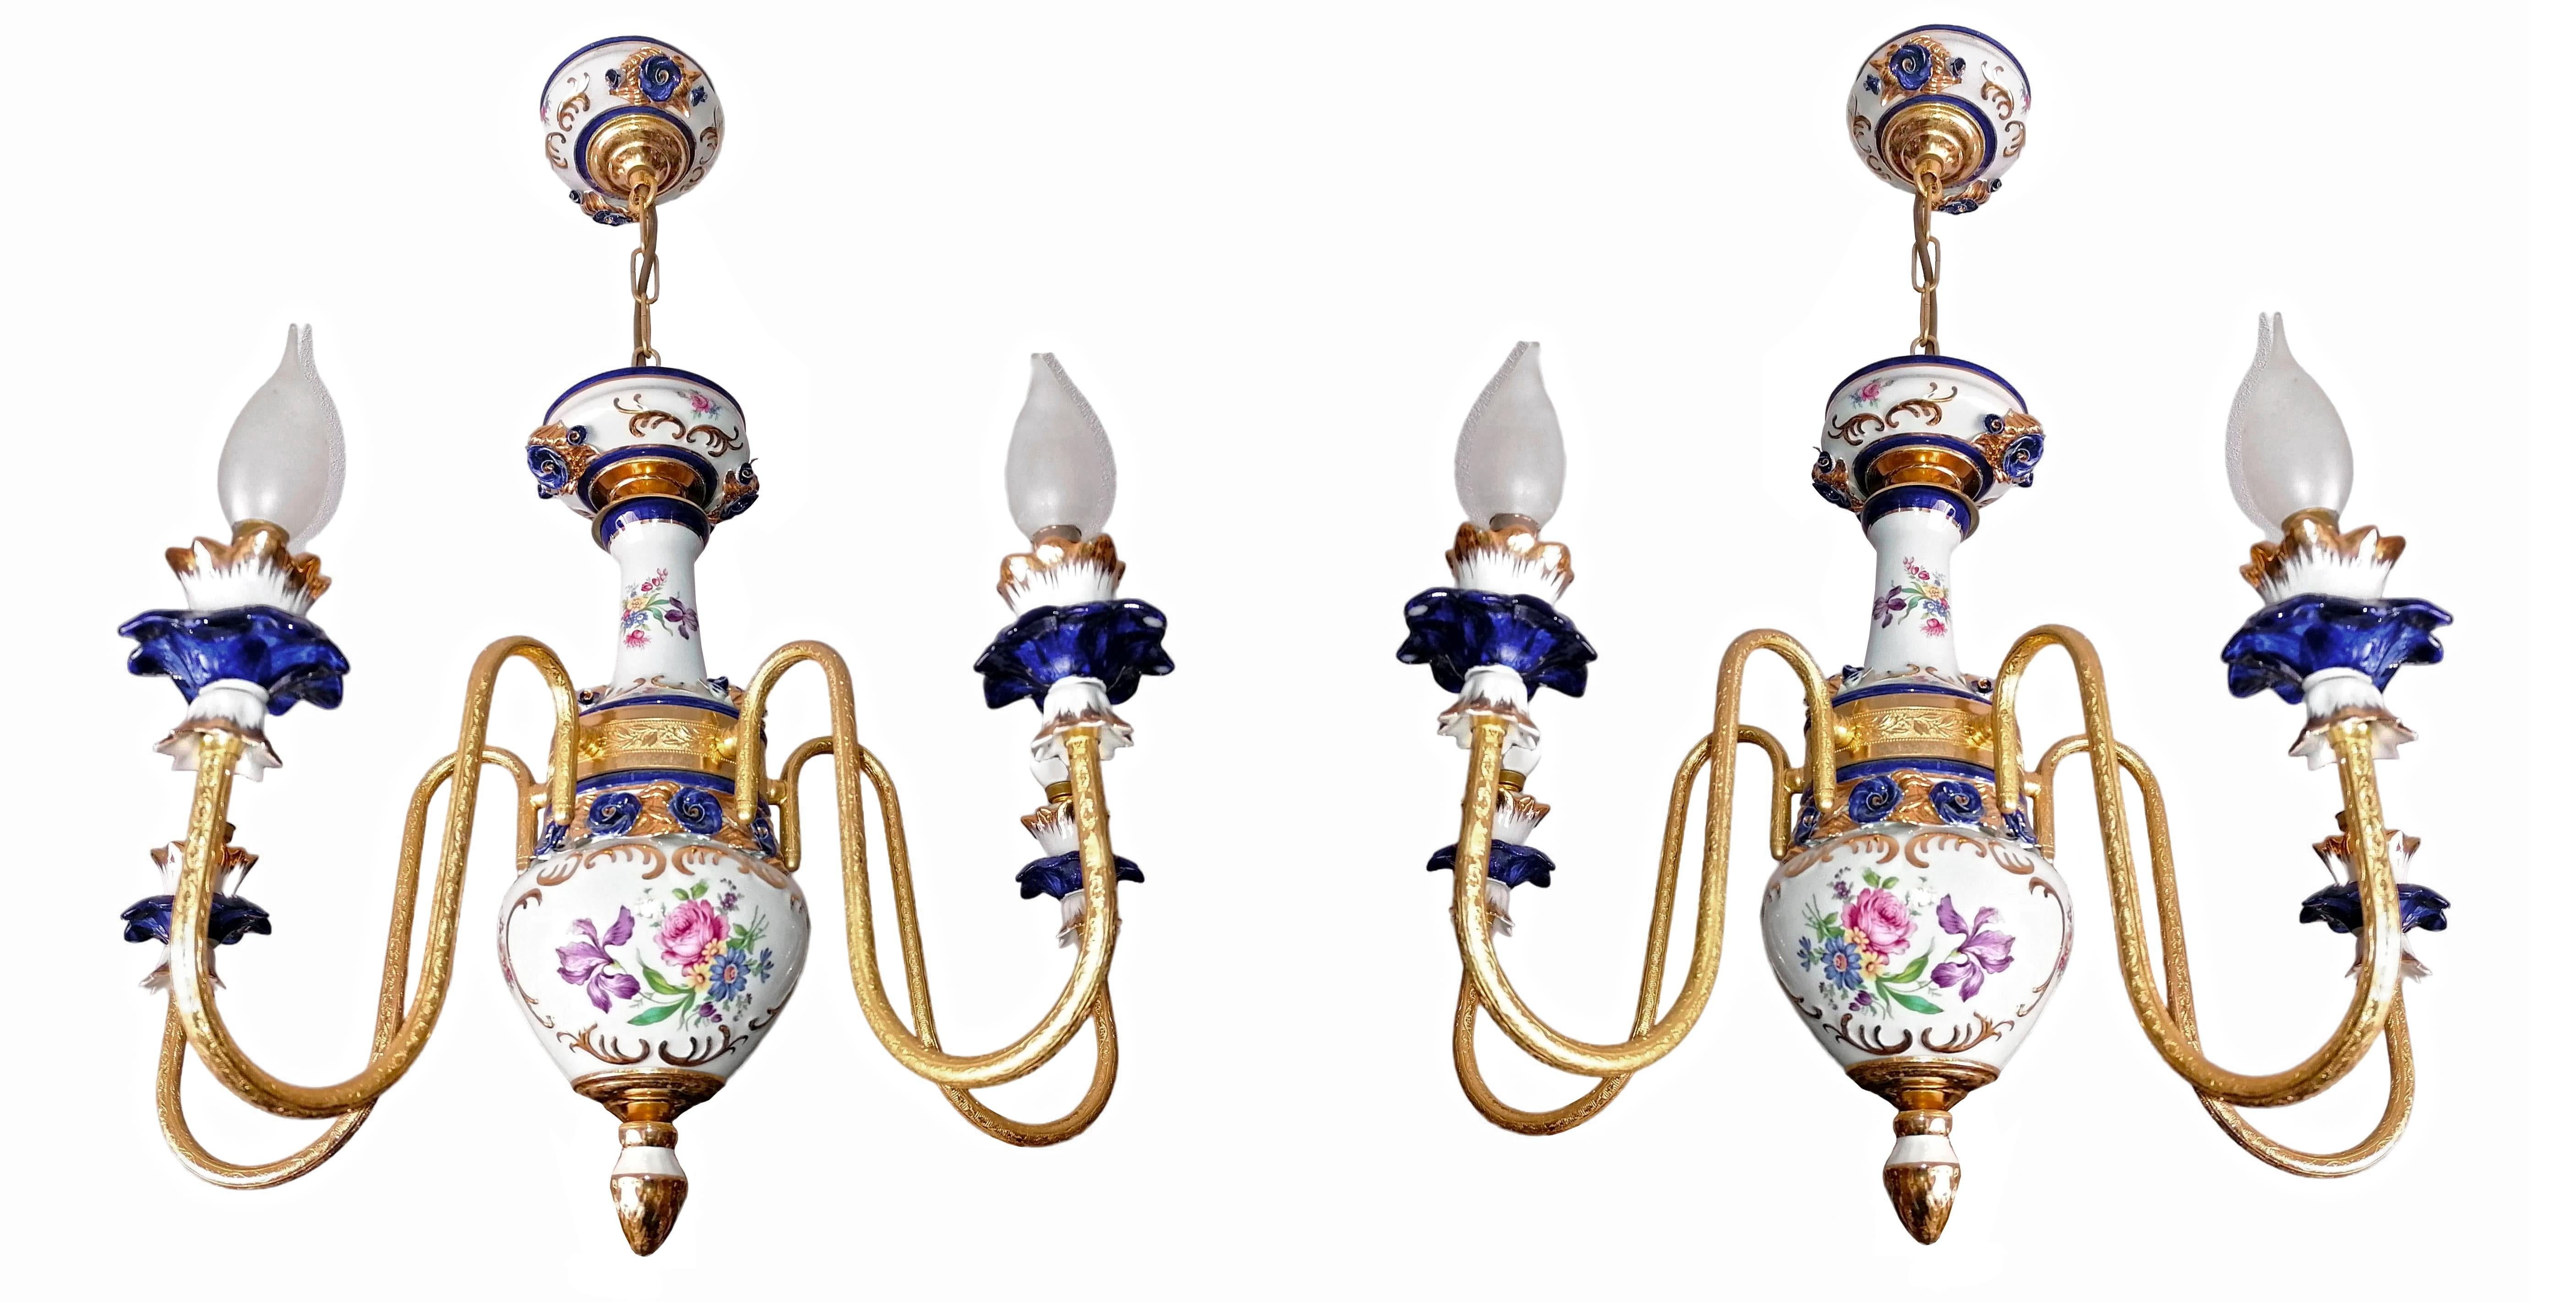 Gorgeous French Limoges style porcelain chandelier with five-light bulbs and sculpted applique porcelain roses, leaves and gilt brass Price per Unit.
Dimensions:
Diameter 23.6 in/ 60 cm
Height 29.5 in/ 75 cm, Chain (20 cm)
Weight: 10 lb/ 5 Kg
Five